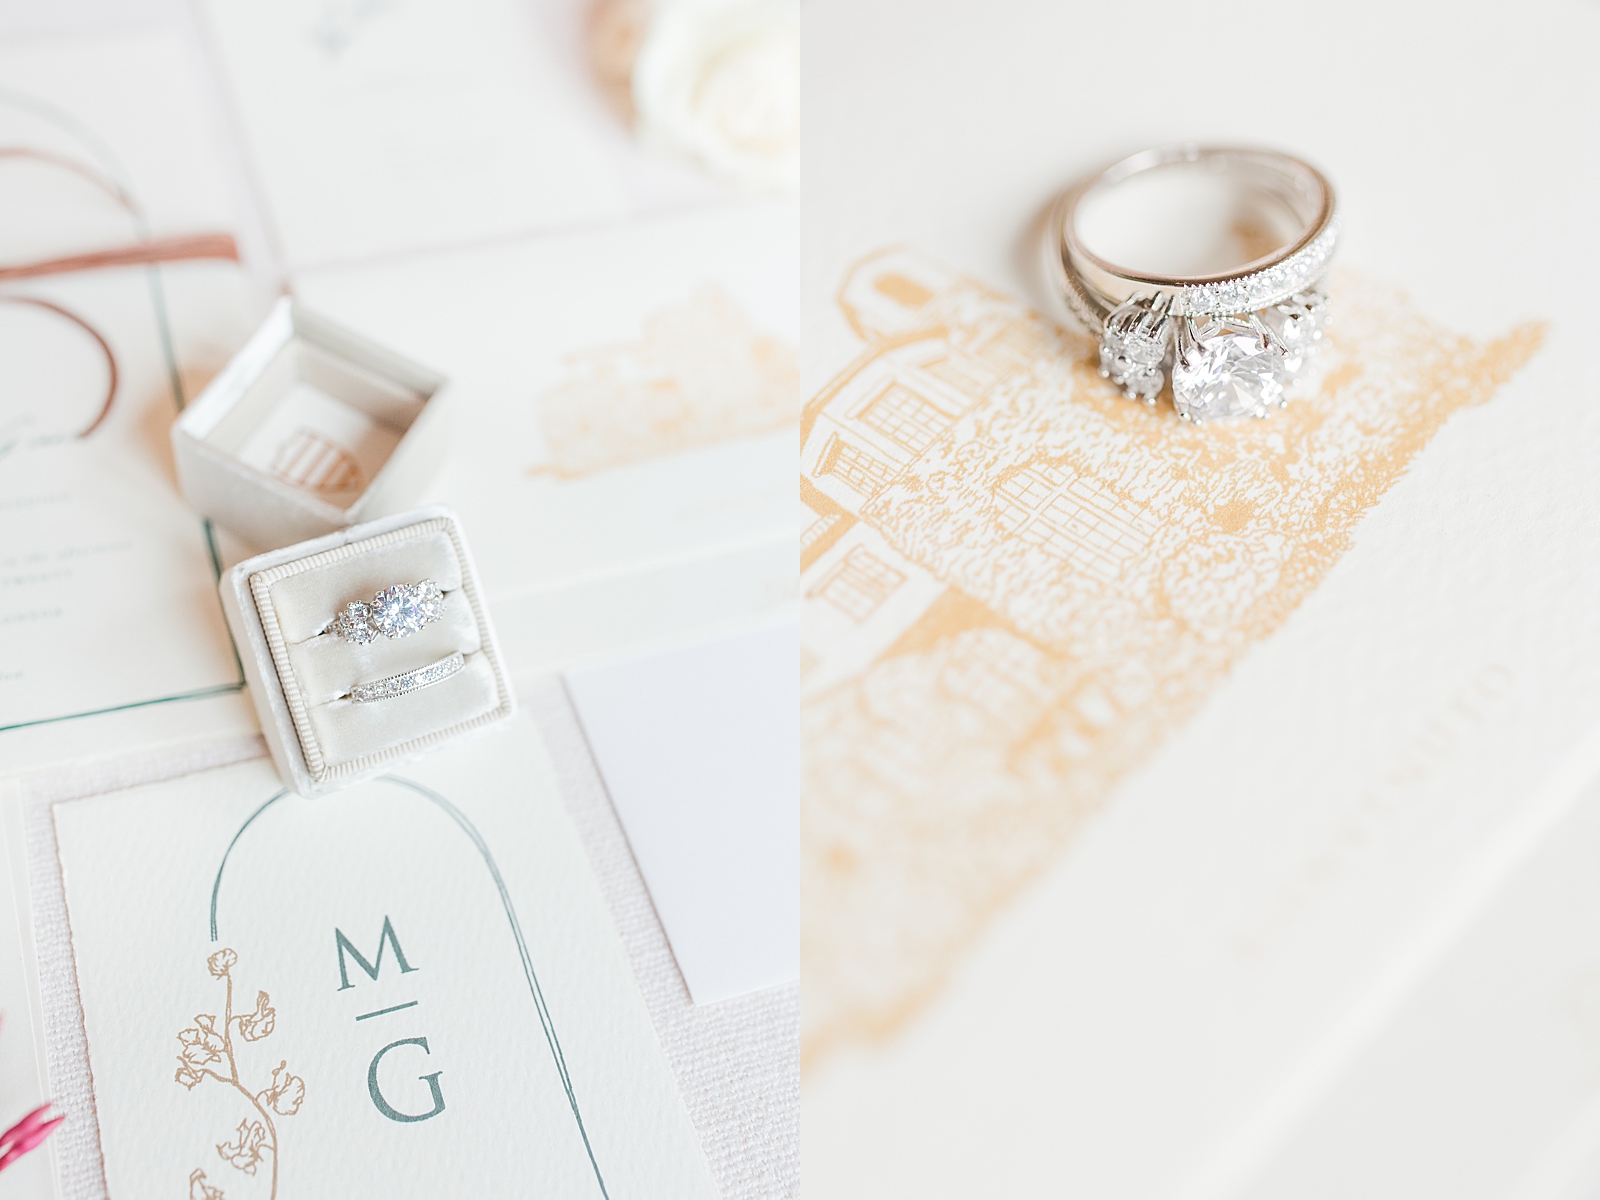 Montaluce Winery Wedding Ring detail on Invitation Suite Photos